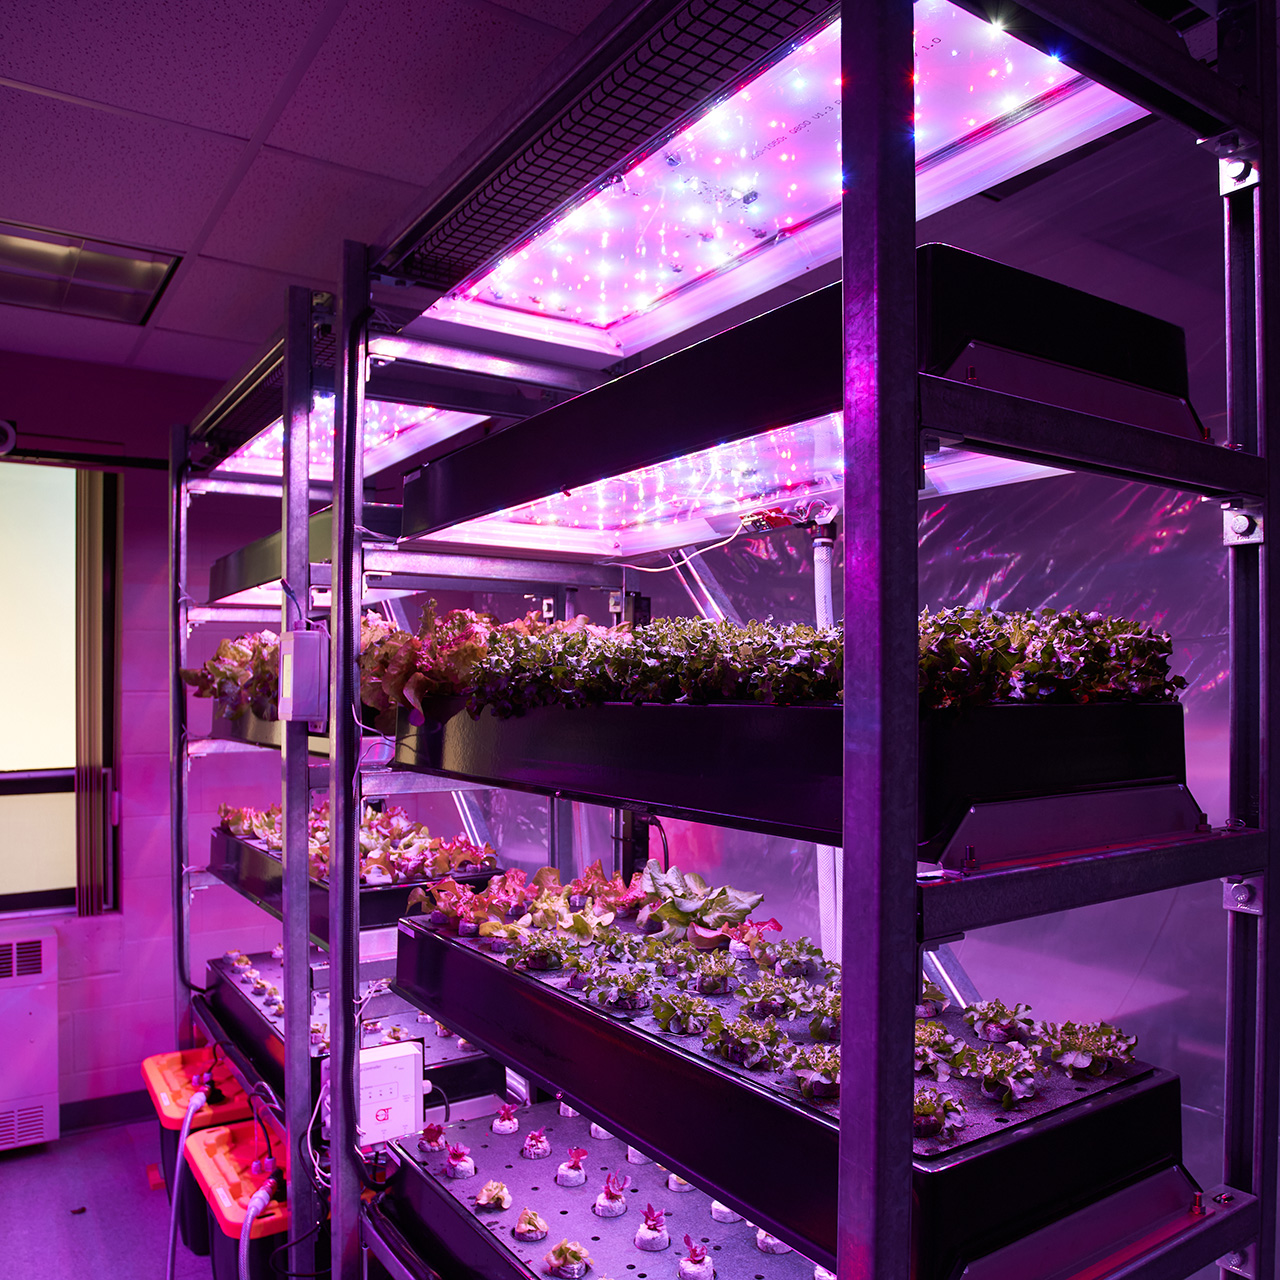 Photo of a vertical gardening setup, with plants growing on multiple levels of shelves under purple lights